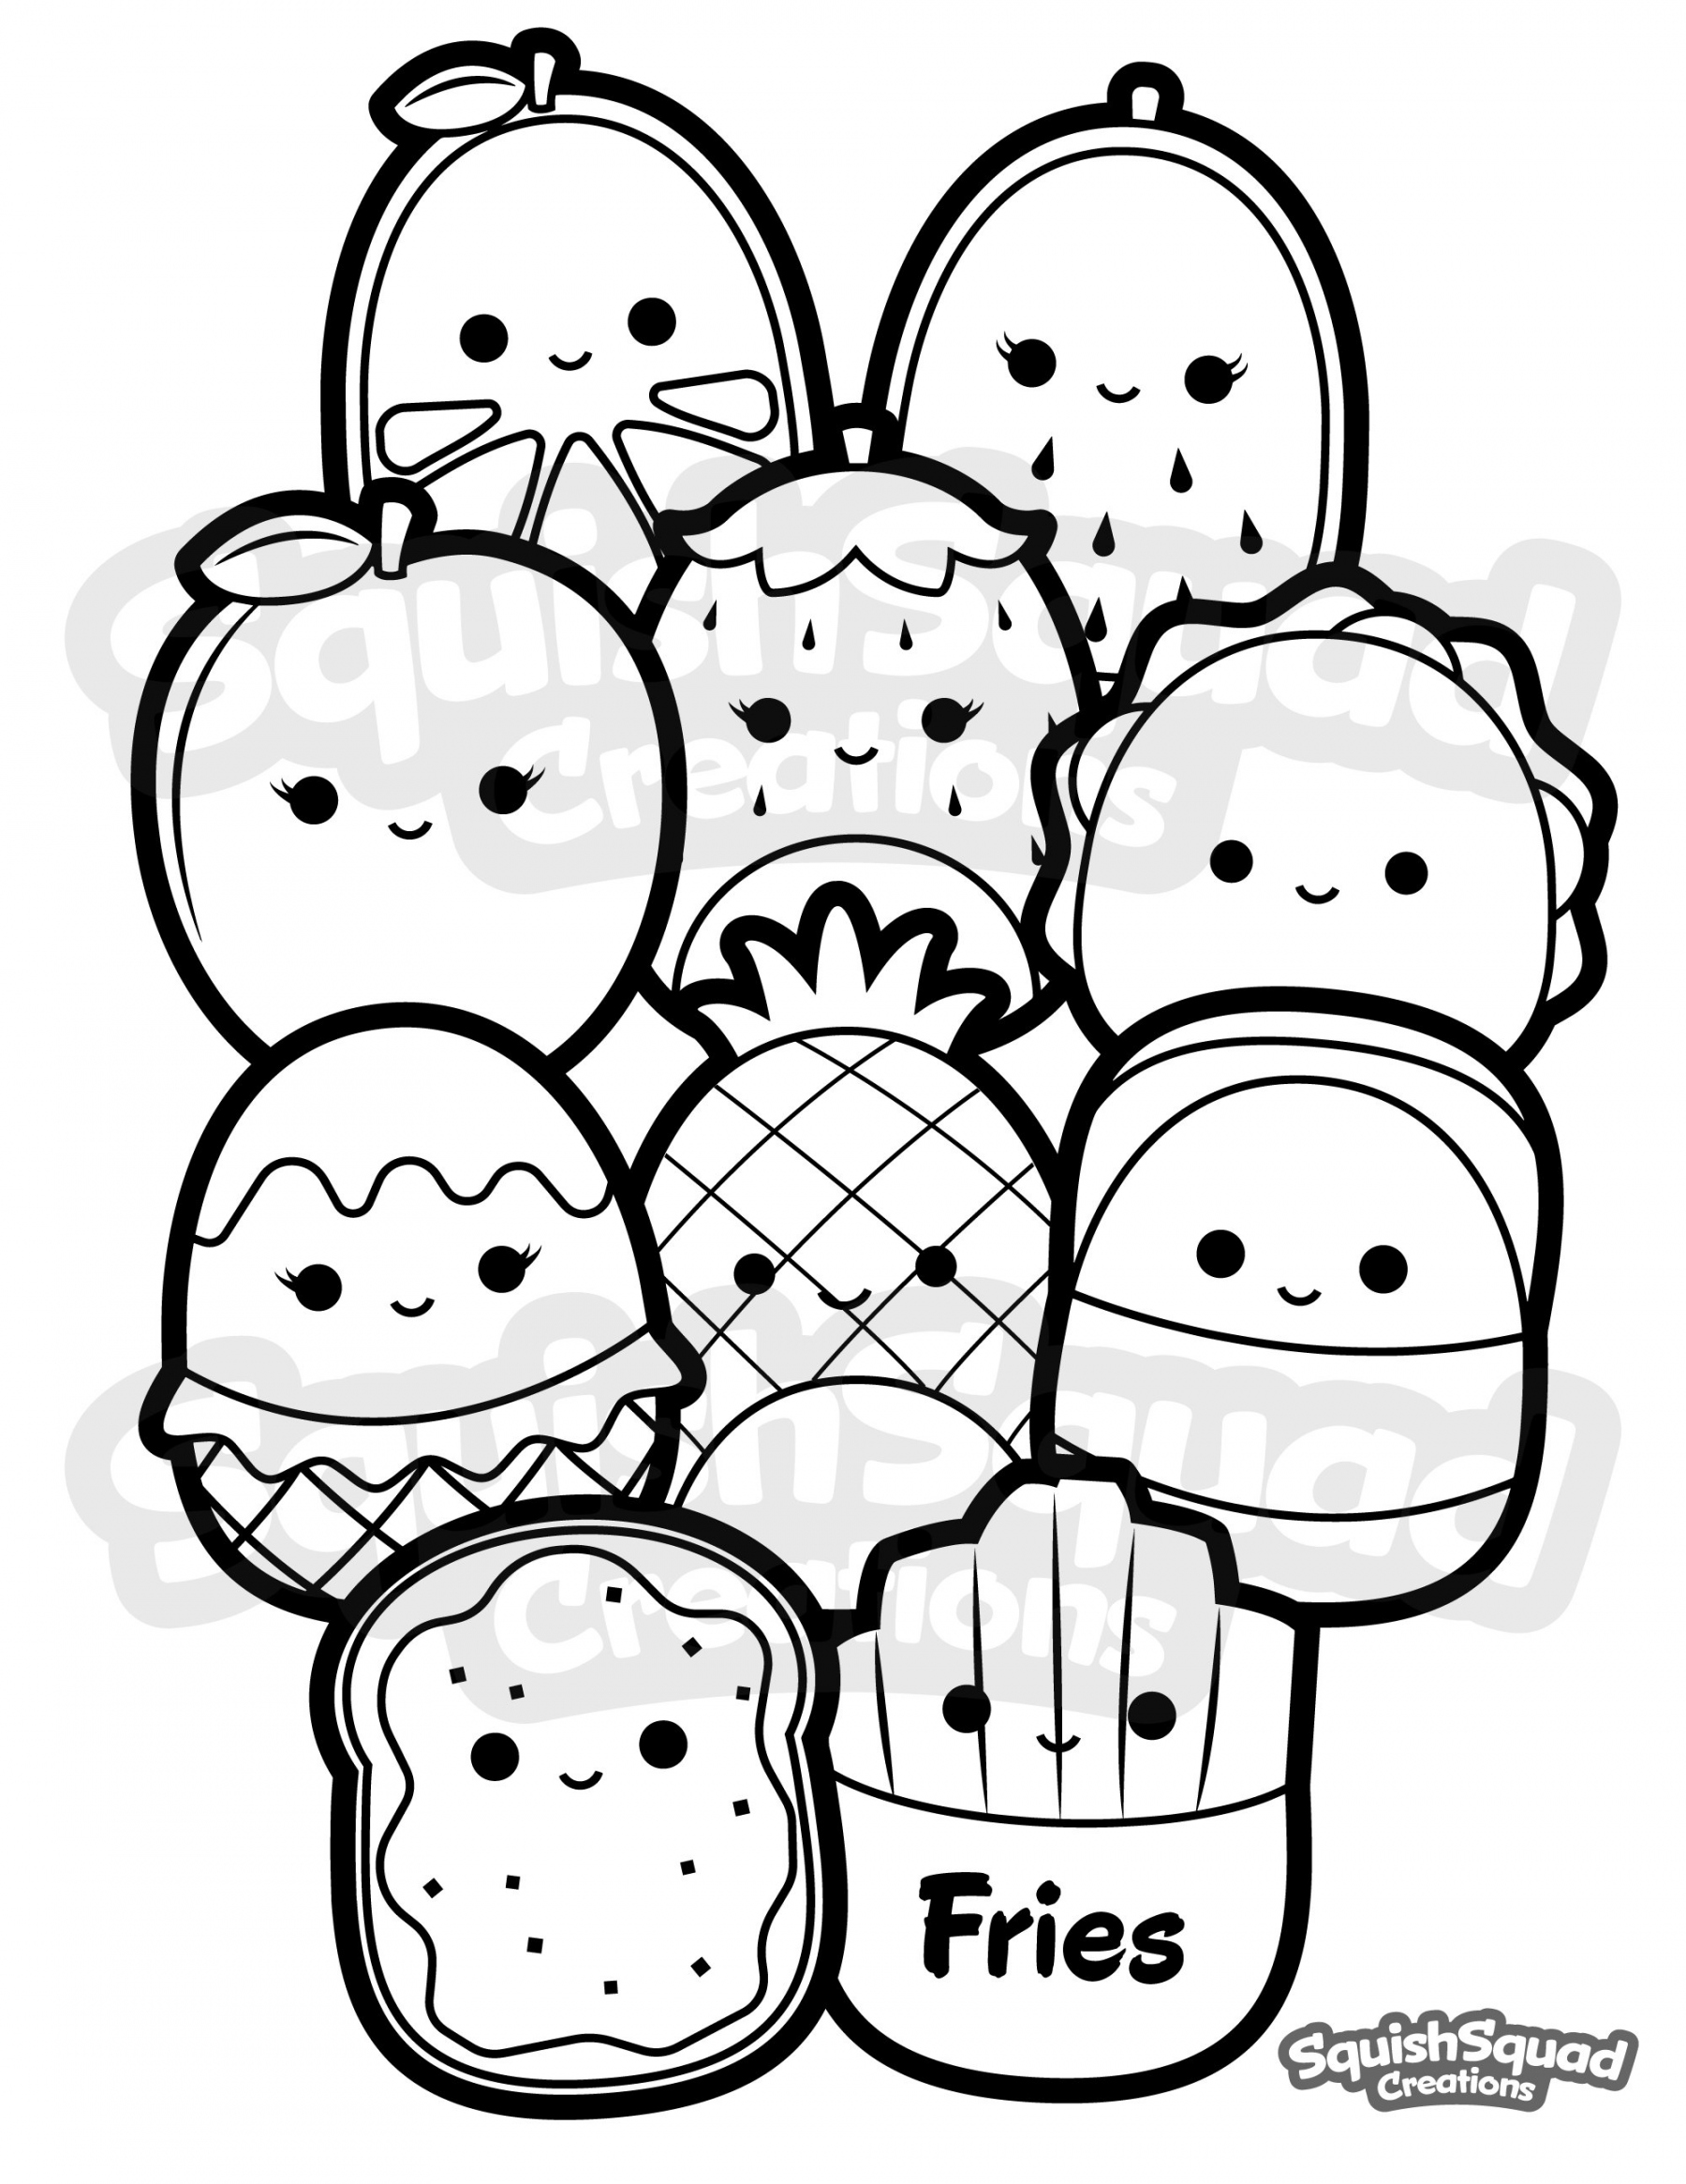 Squishmallow Coloring Page, Printable Squishmallow Coloring Page,  Squishmallow Downloadable Coloring Sheet, Coloring Page For Kids - FREE Printables - Free Printable Squishmallow Coloring Pages